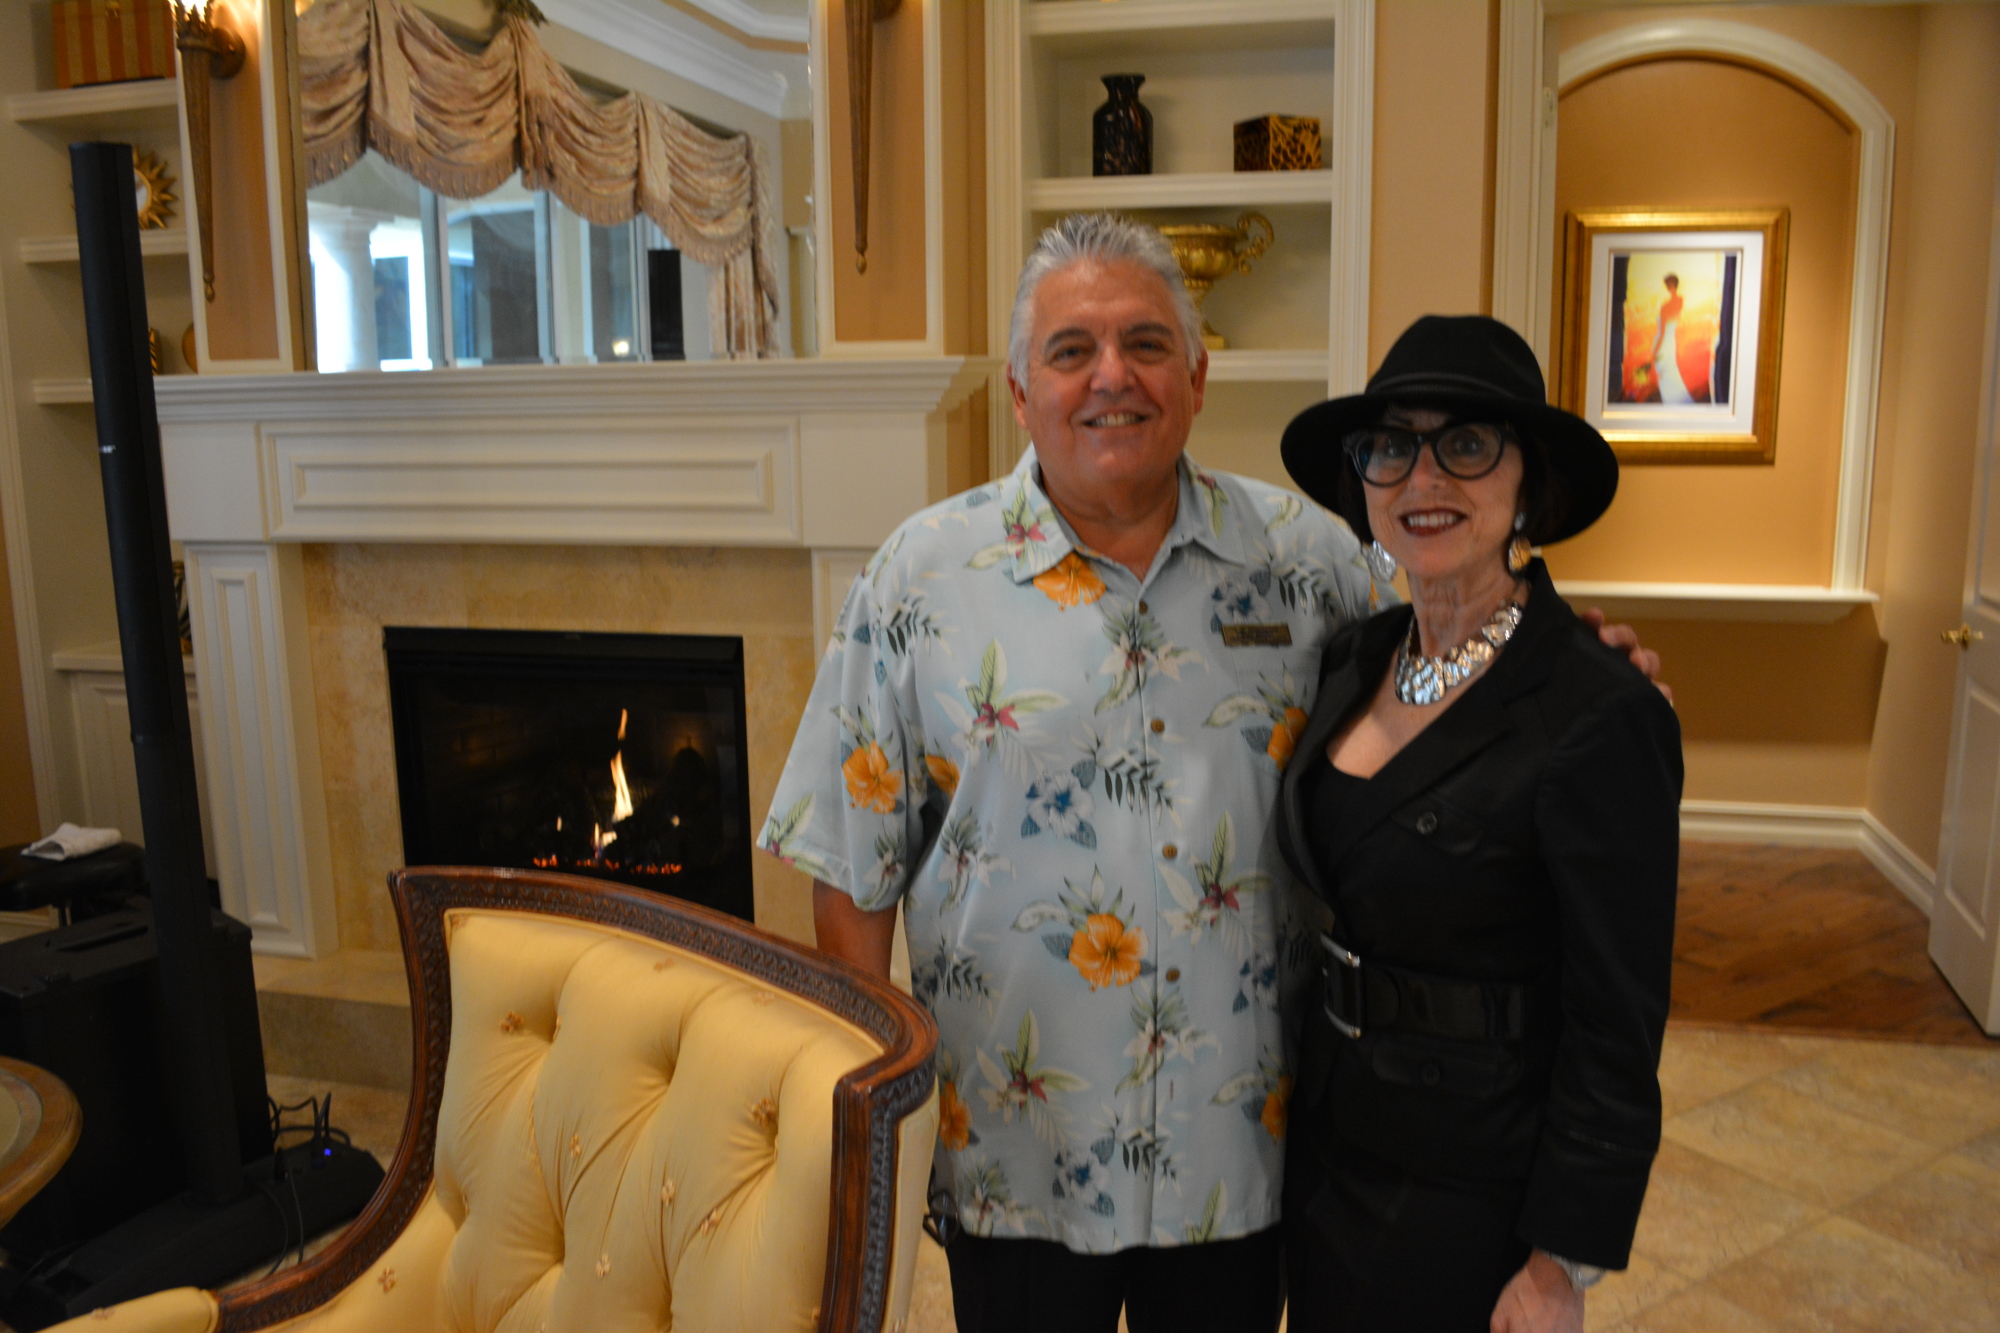 Realtors Tom Cinquegrano and Deborah O'Mara of Michael Saunders pose in the room of the home they are selling on Ganton Avenue in the Concession.